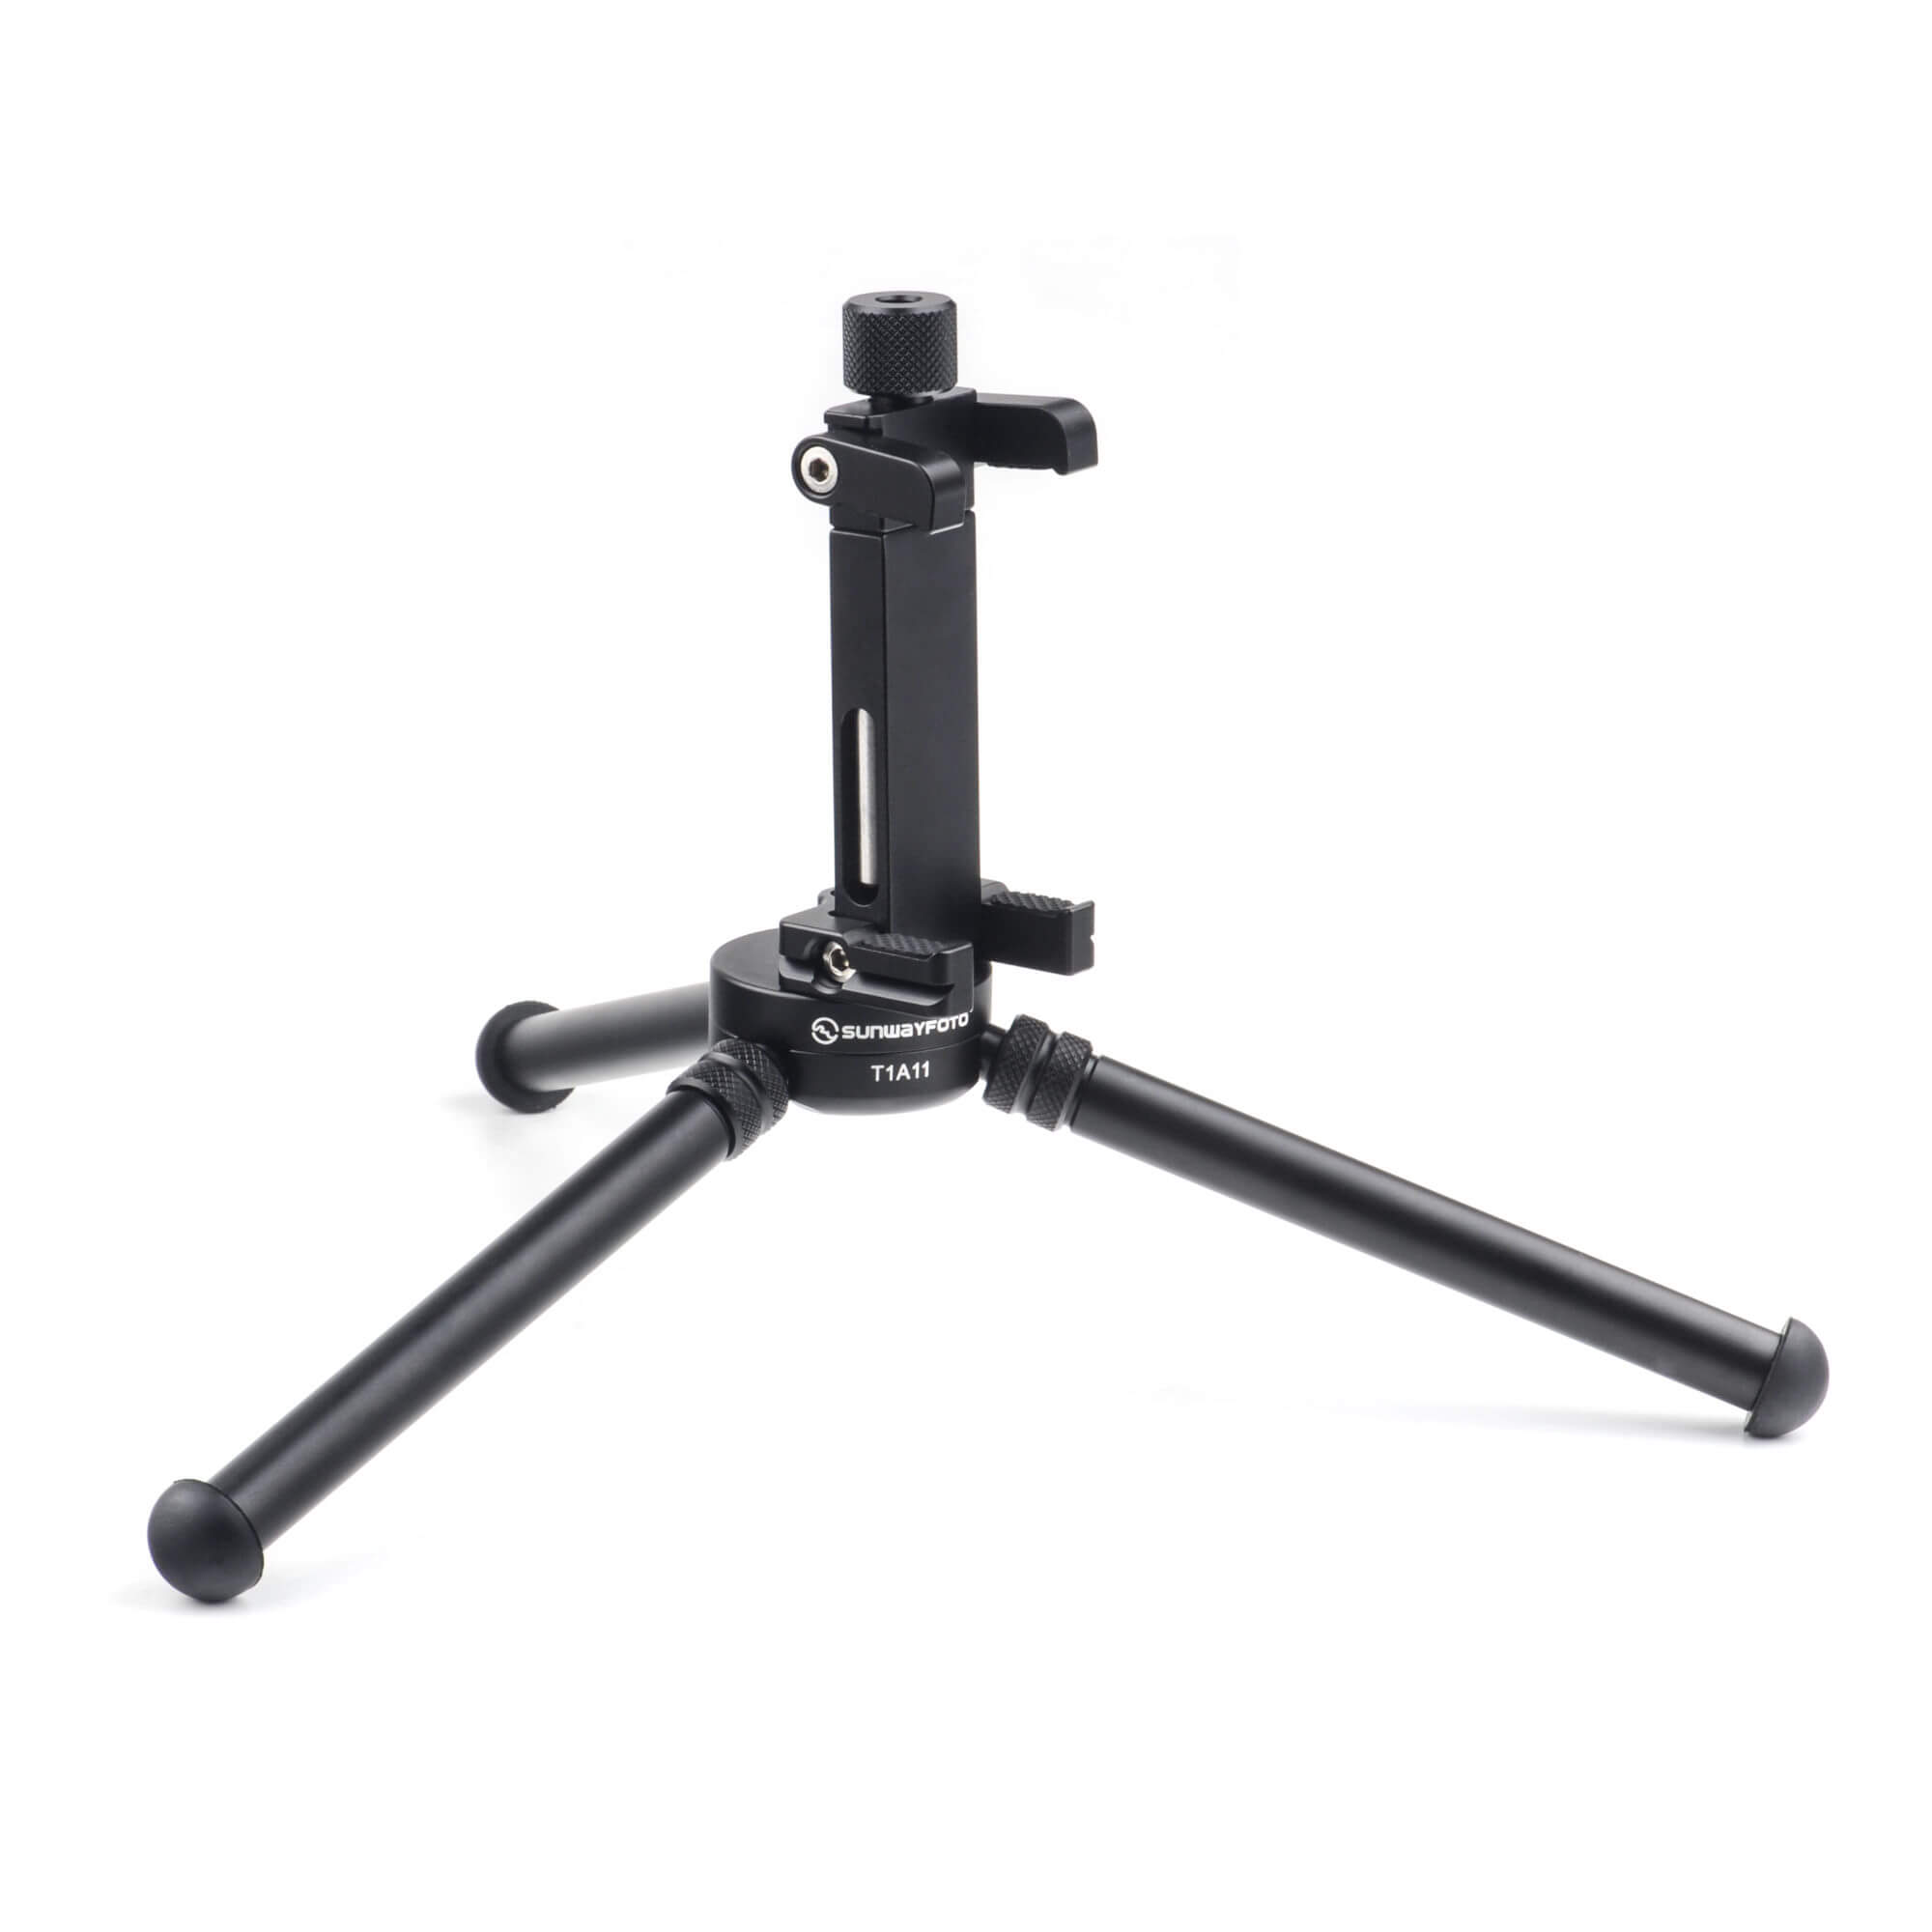 Sunwayfoto T1A11-T1 small tripod with CPC-02 smartphone holder